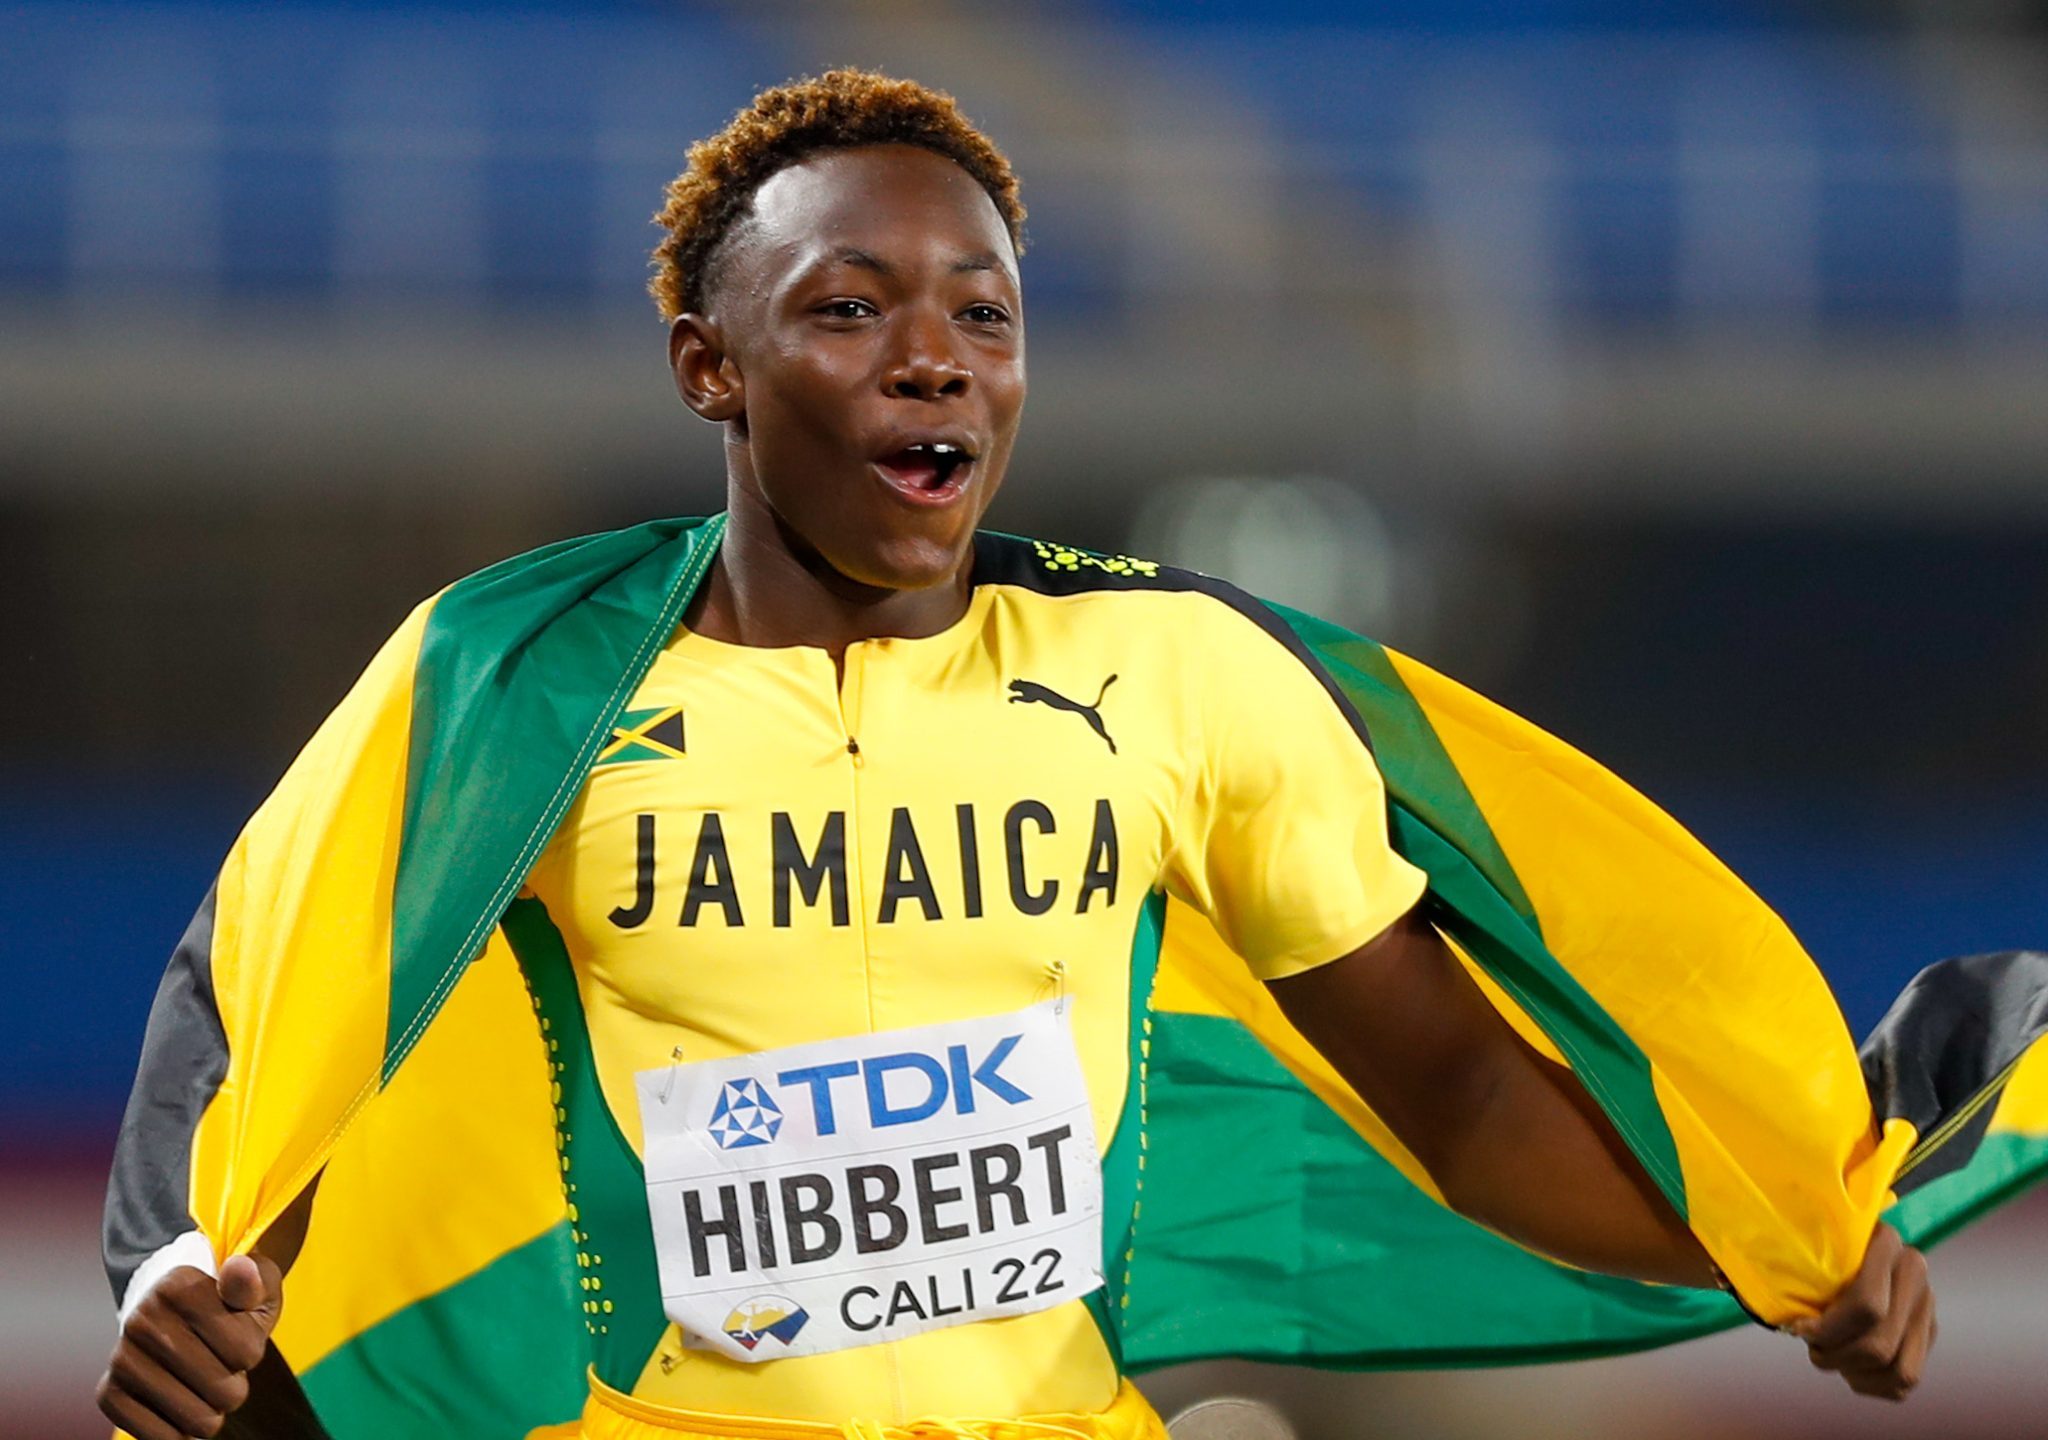 Ready for Budapest 23 ...Jaydon Hibbert of Jamaica is the winner of the men's triple jump at the Cali22 World Athletics U20 Championships. He won with a championship record of 17.27m